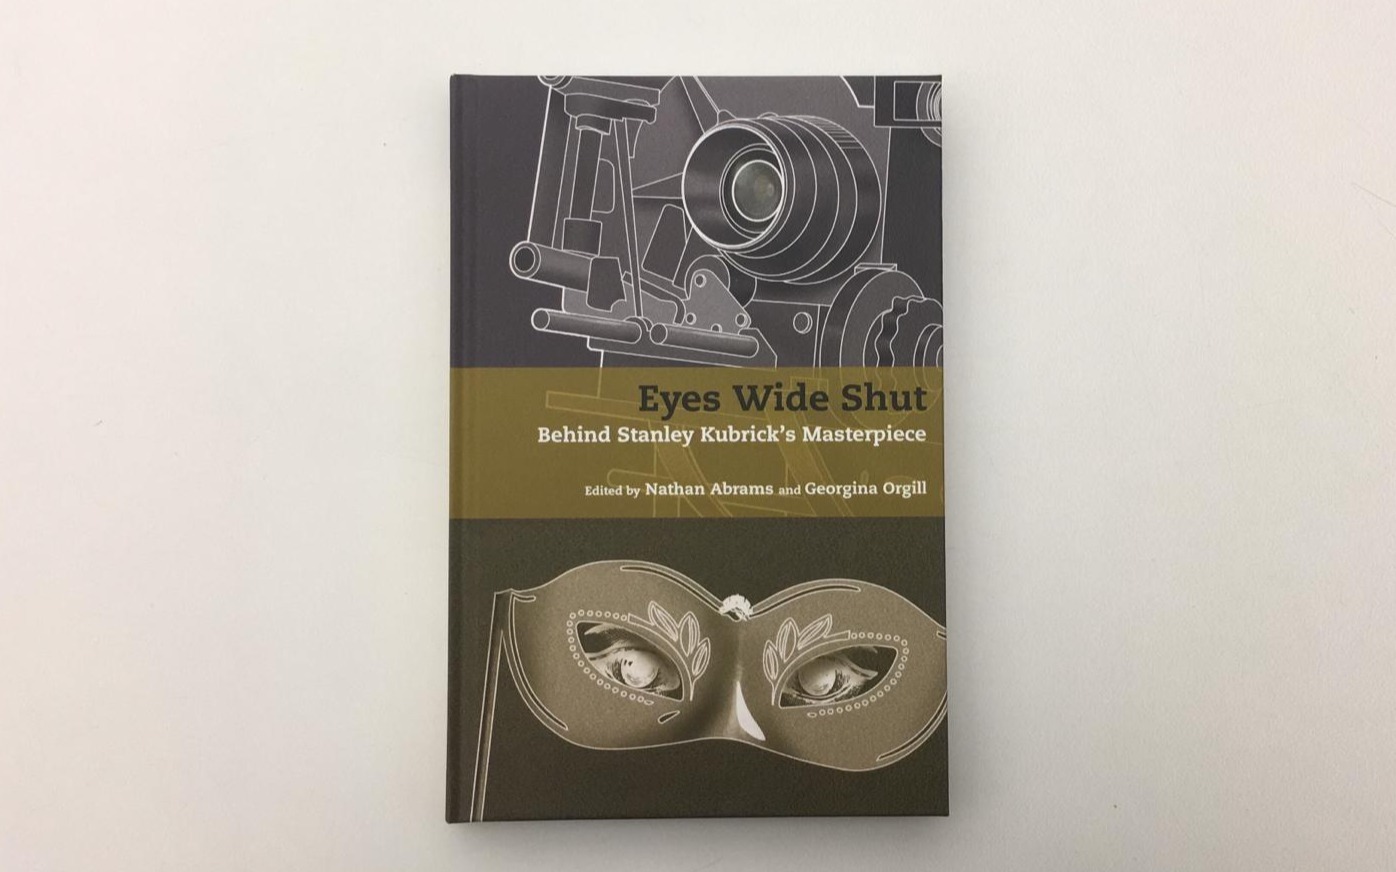 Photograph showing a copy of the book 'Eyes Wide Shut: Behind Stanley Kubrick's Masterpiece' Edited by Nathan Abrams and Georgina Orgill